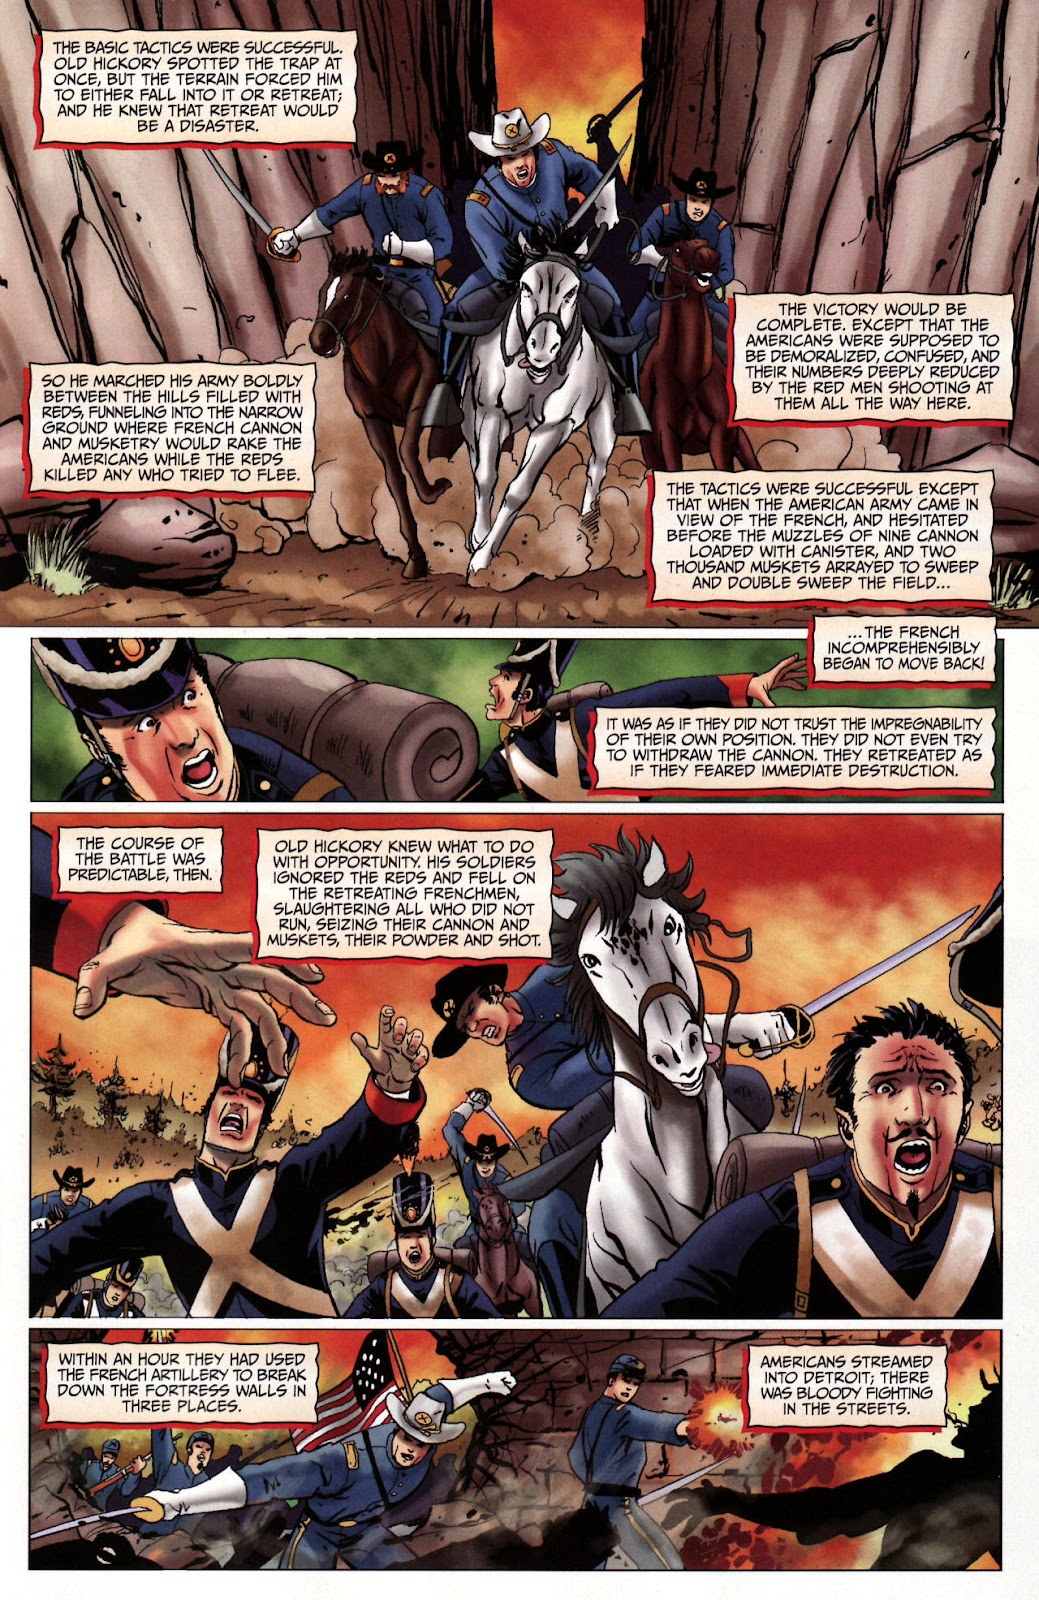 Red Prophet: The Tales of Alvin Maker issue 12 - Page 14